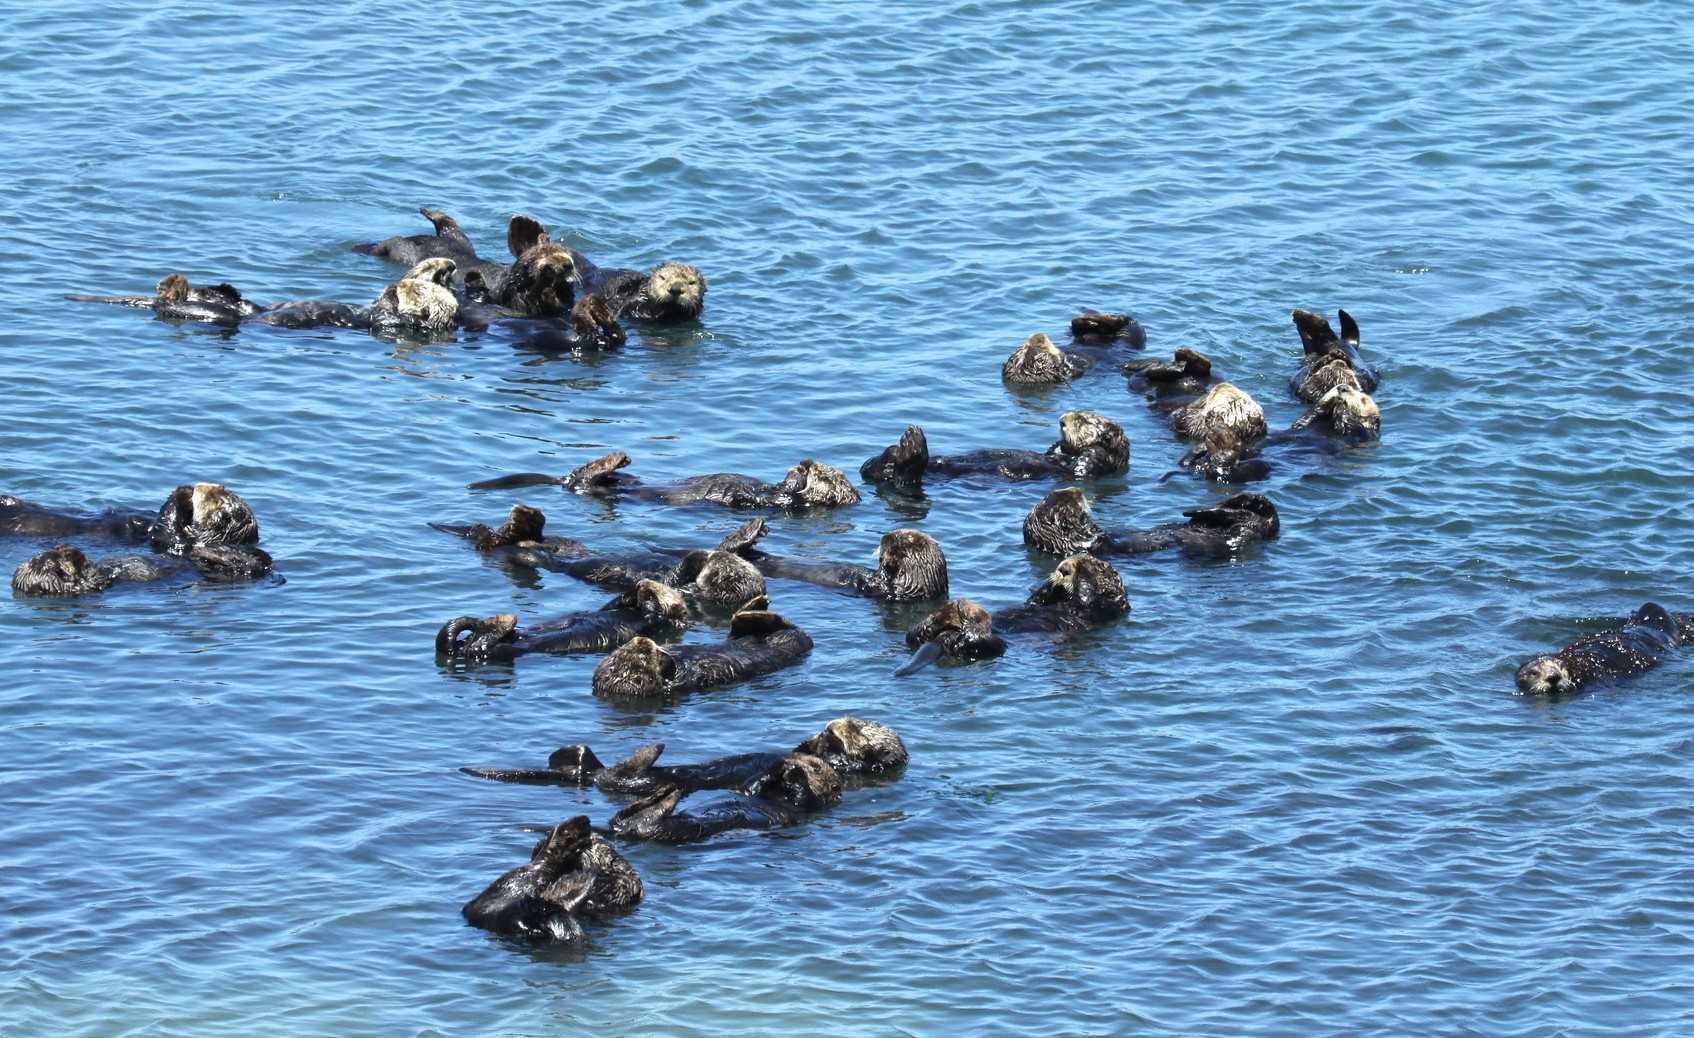 A large group of sea otters all float together in the water